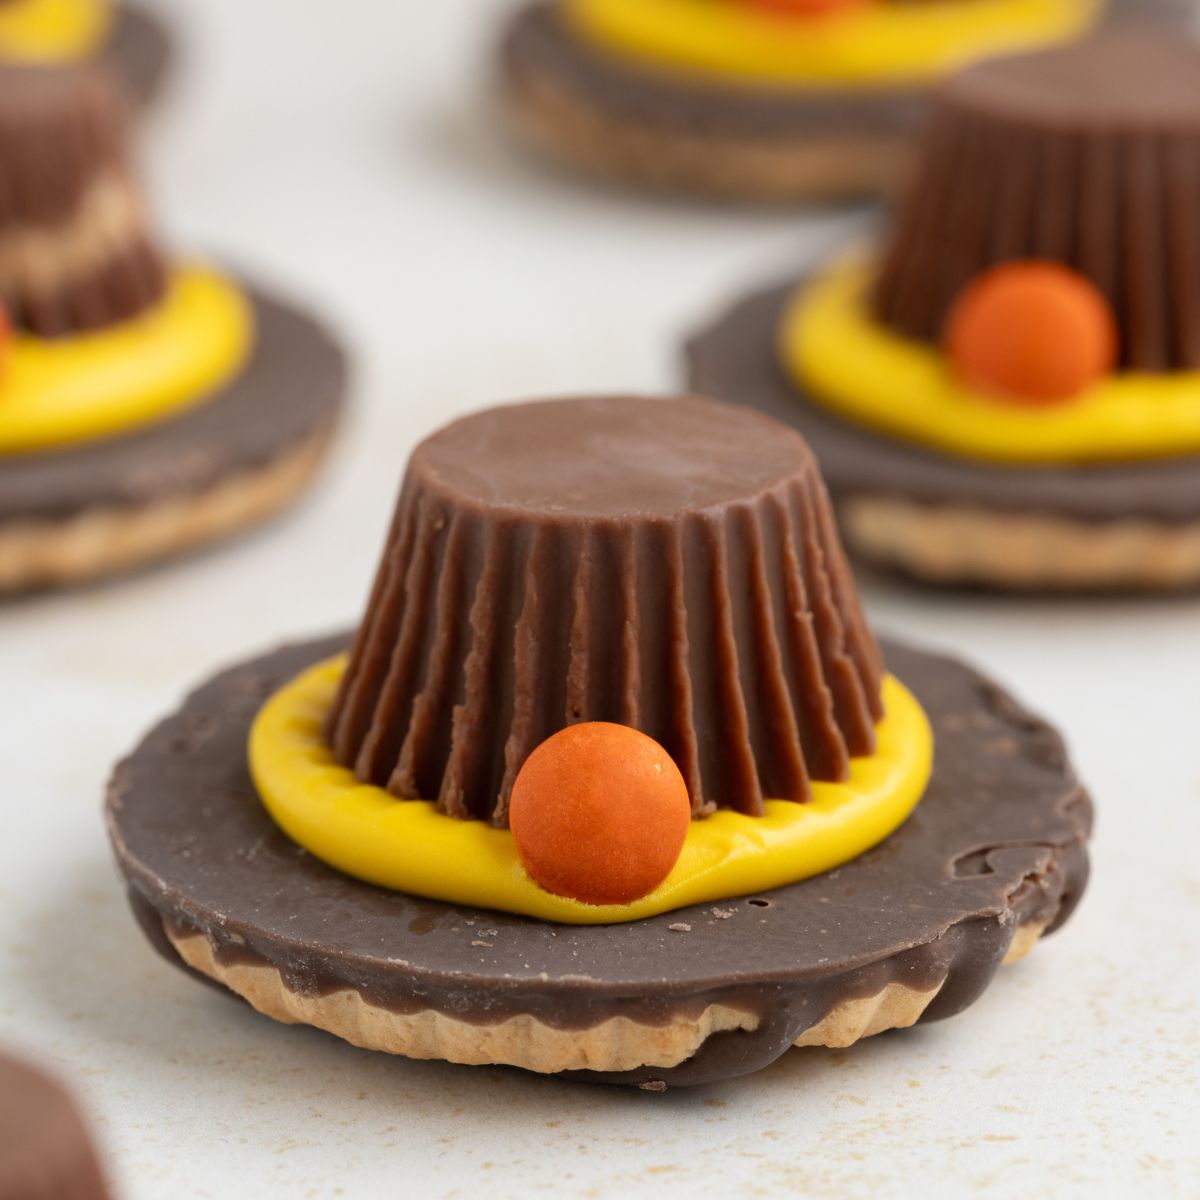 Delight in charming Pilgrim hat cookies, a festive addition to your Thanksgiving table.